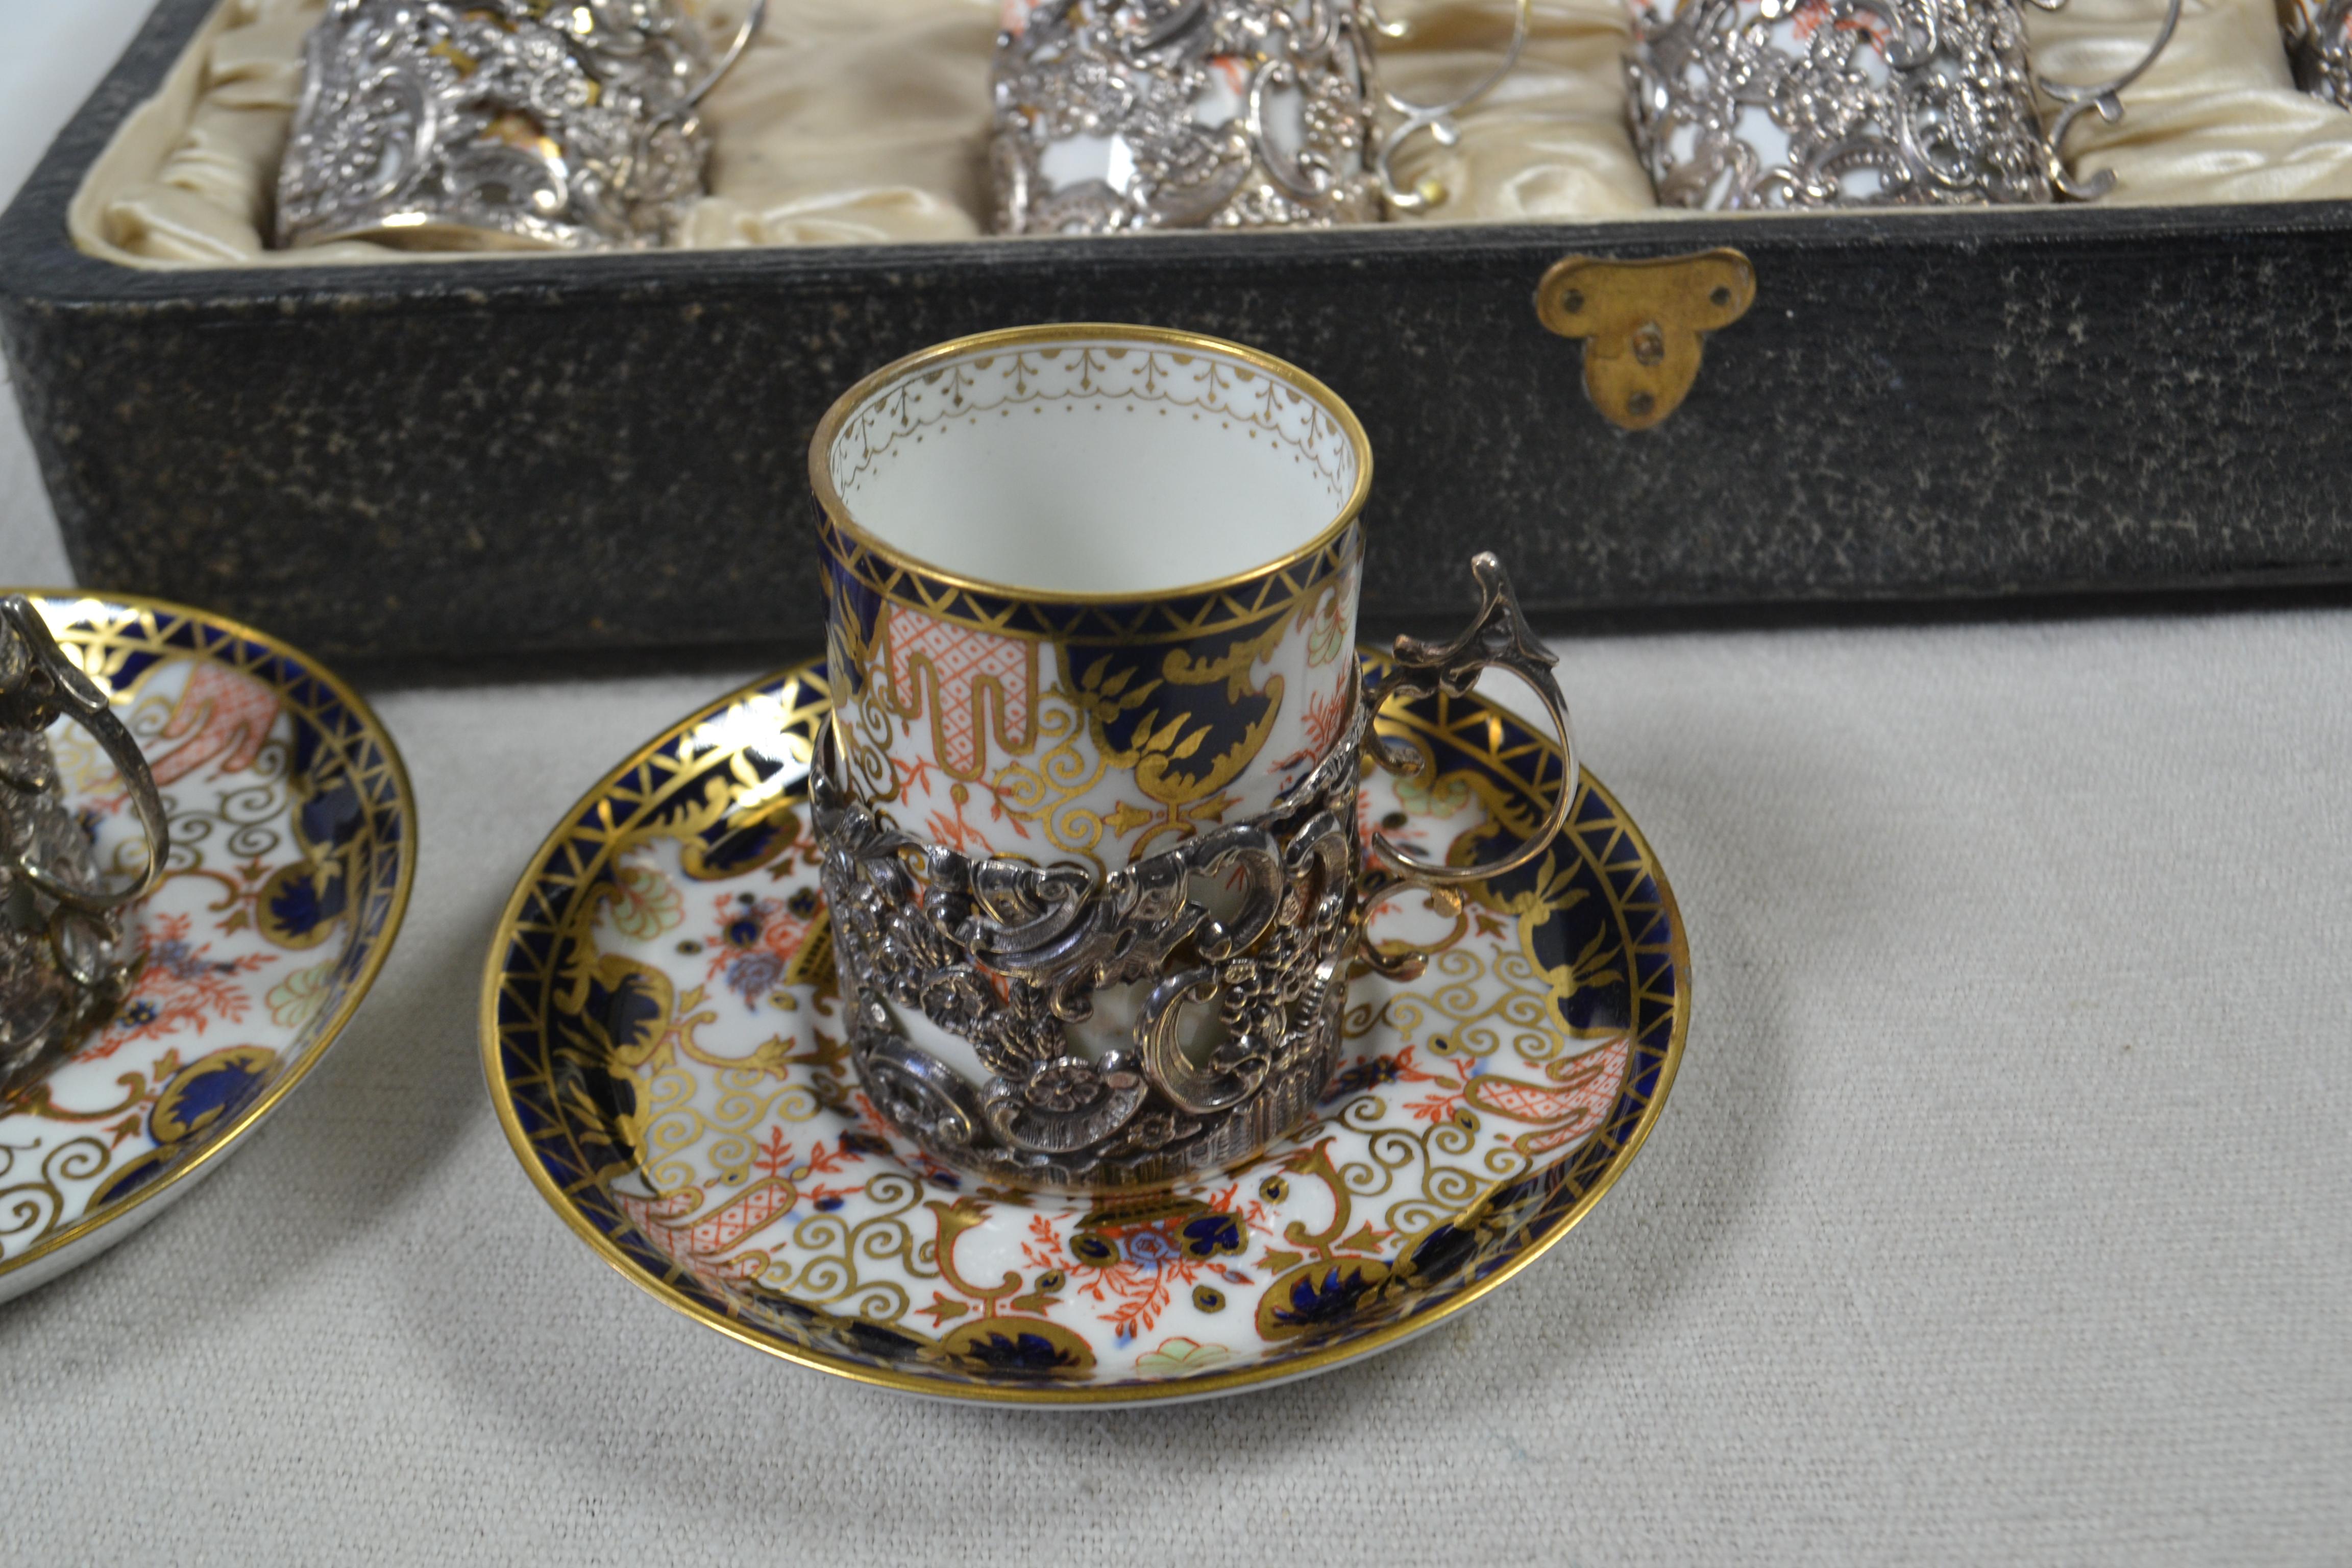 12-piece blue, white and multi color bone china Royal Crown Derby 3788 antique coffee service with ornate floral and geometric motif throughout, gilt trim and brand stamp at undersides. Includes 6 Royal Crown Derby flat cups, 6 Royal Crown Derby